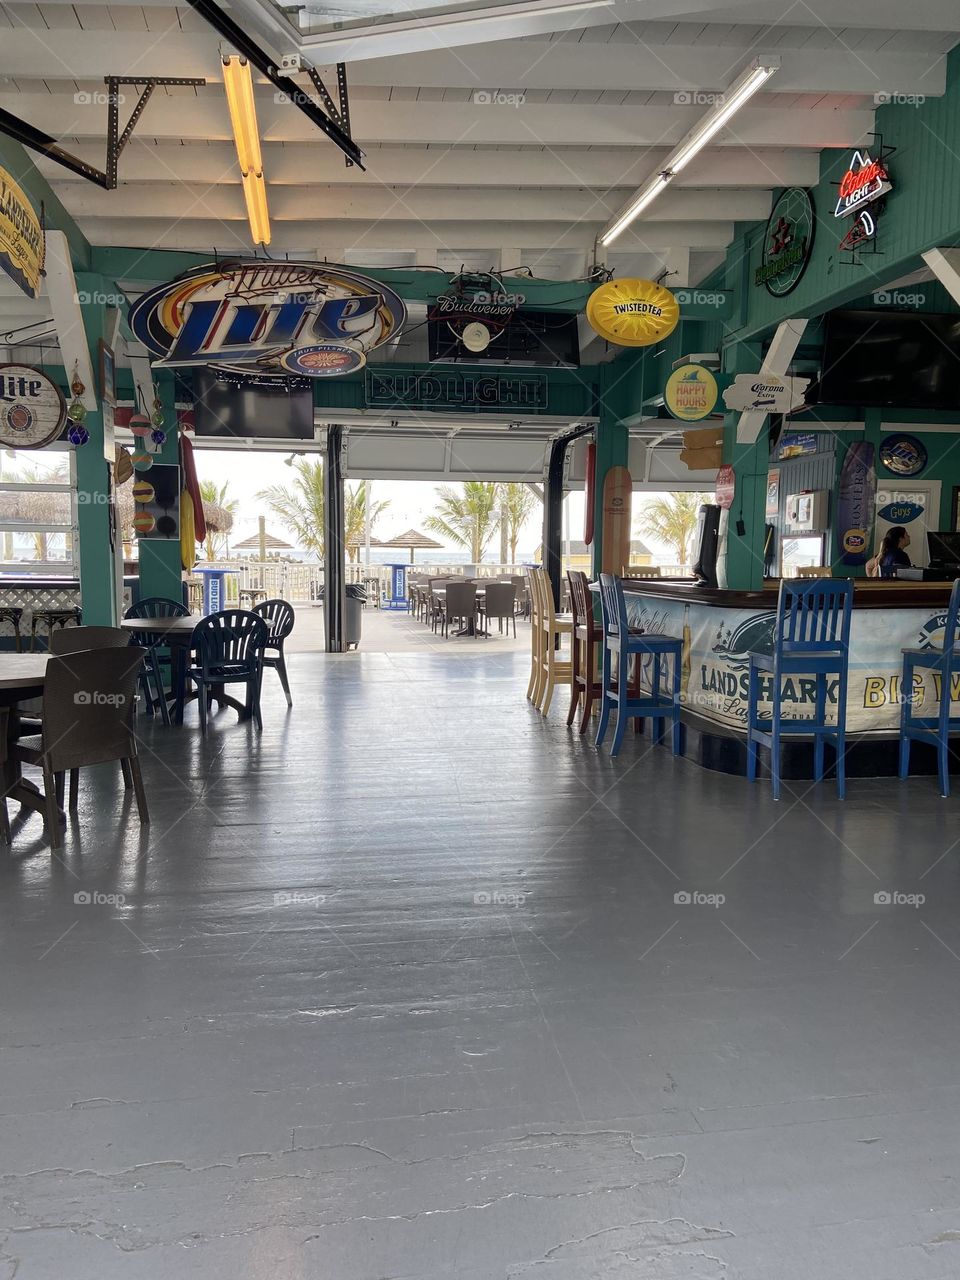 A beach bar with indoor and outdoor seating where you can kick back, enjoy a beer and burger, and view the ocean. This is Jenks Inlet Bar & Restaurant and is known for being where the locals hang out on the Point Pleasant Beach boardwalk in NJ. 